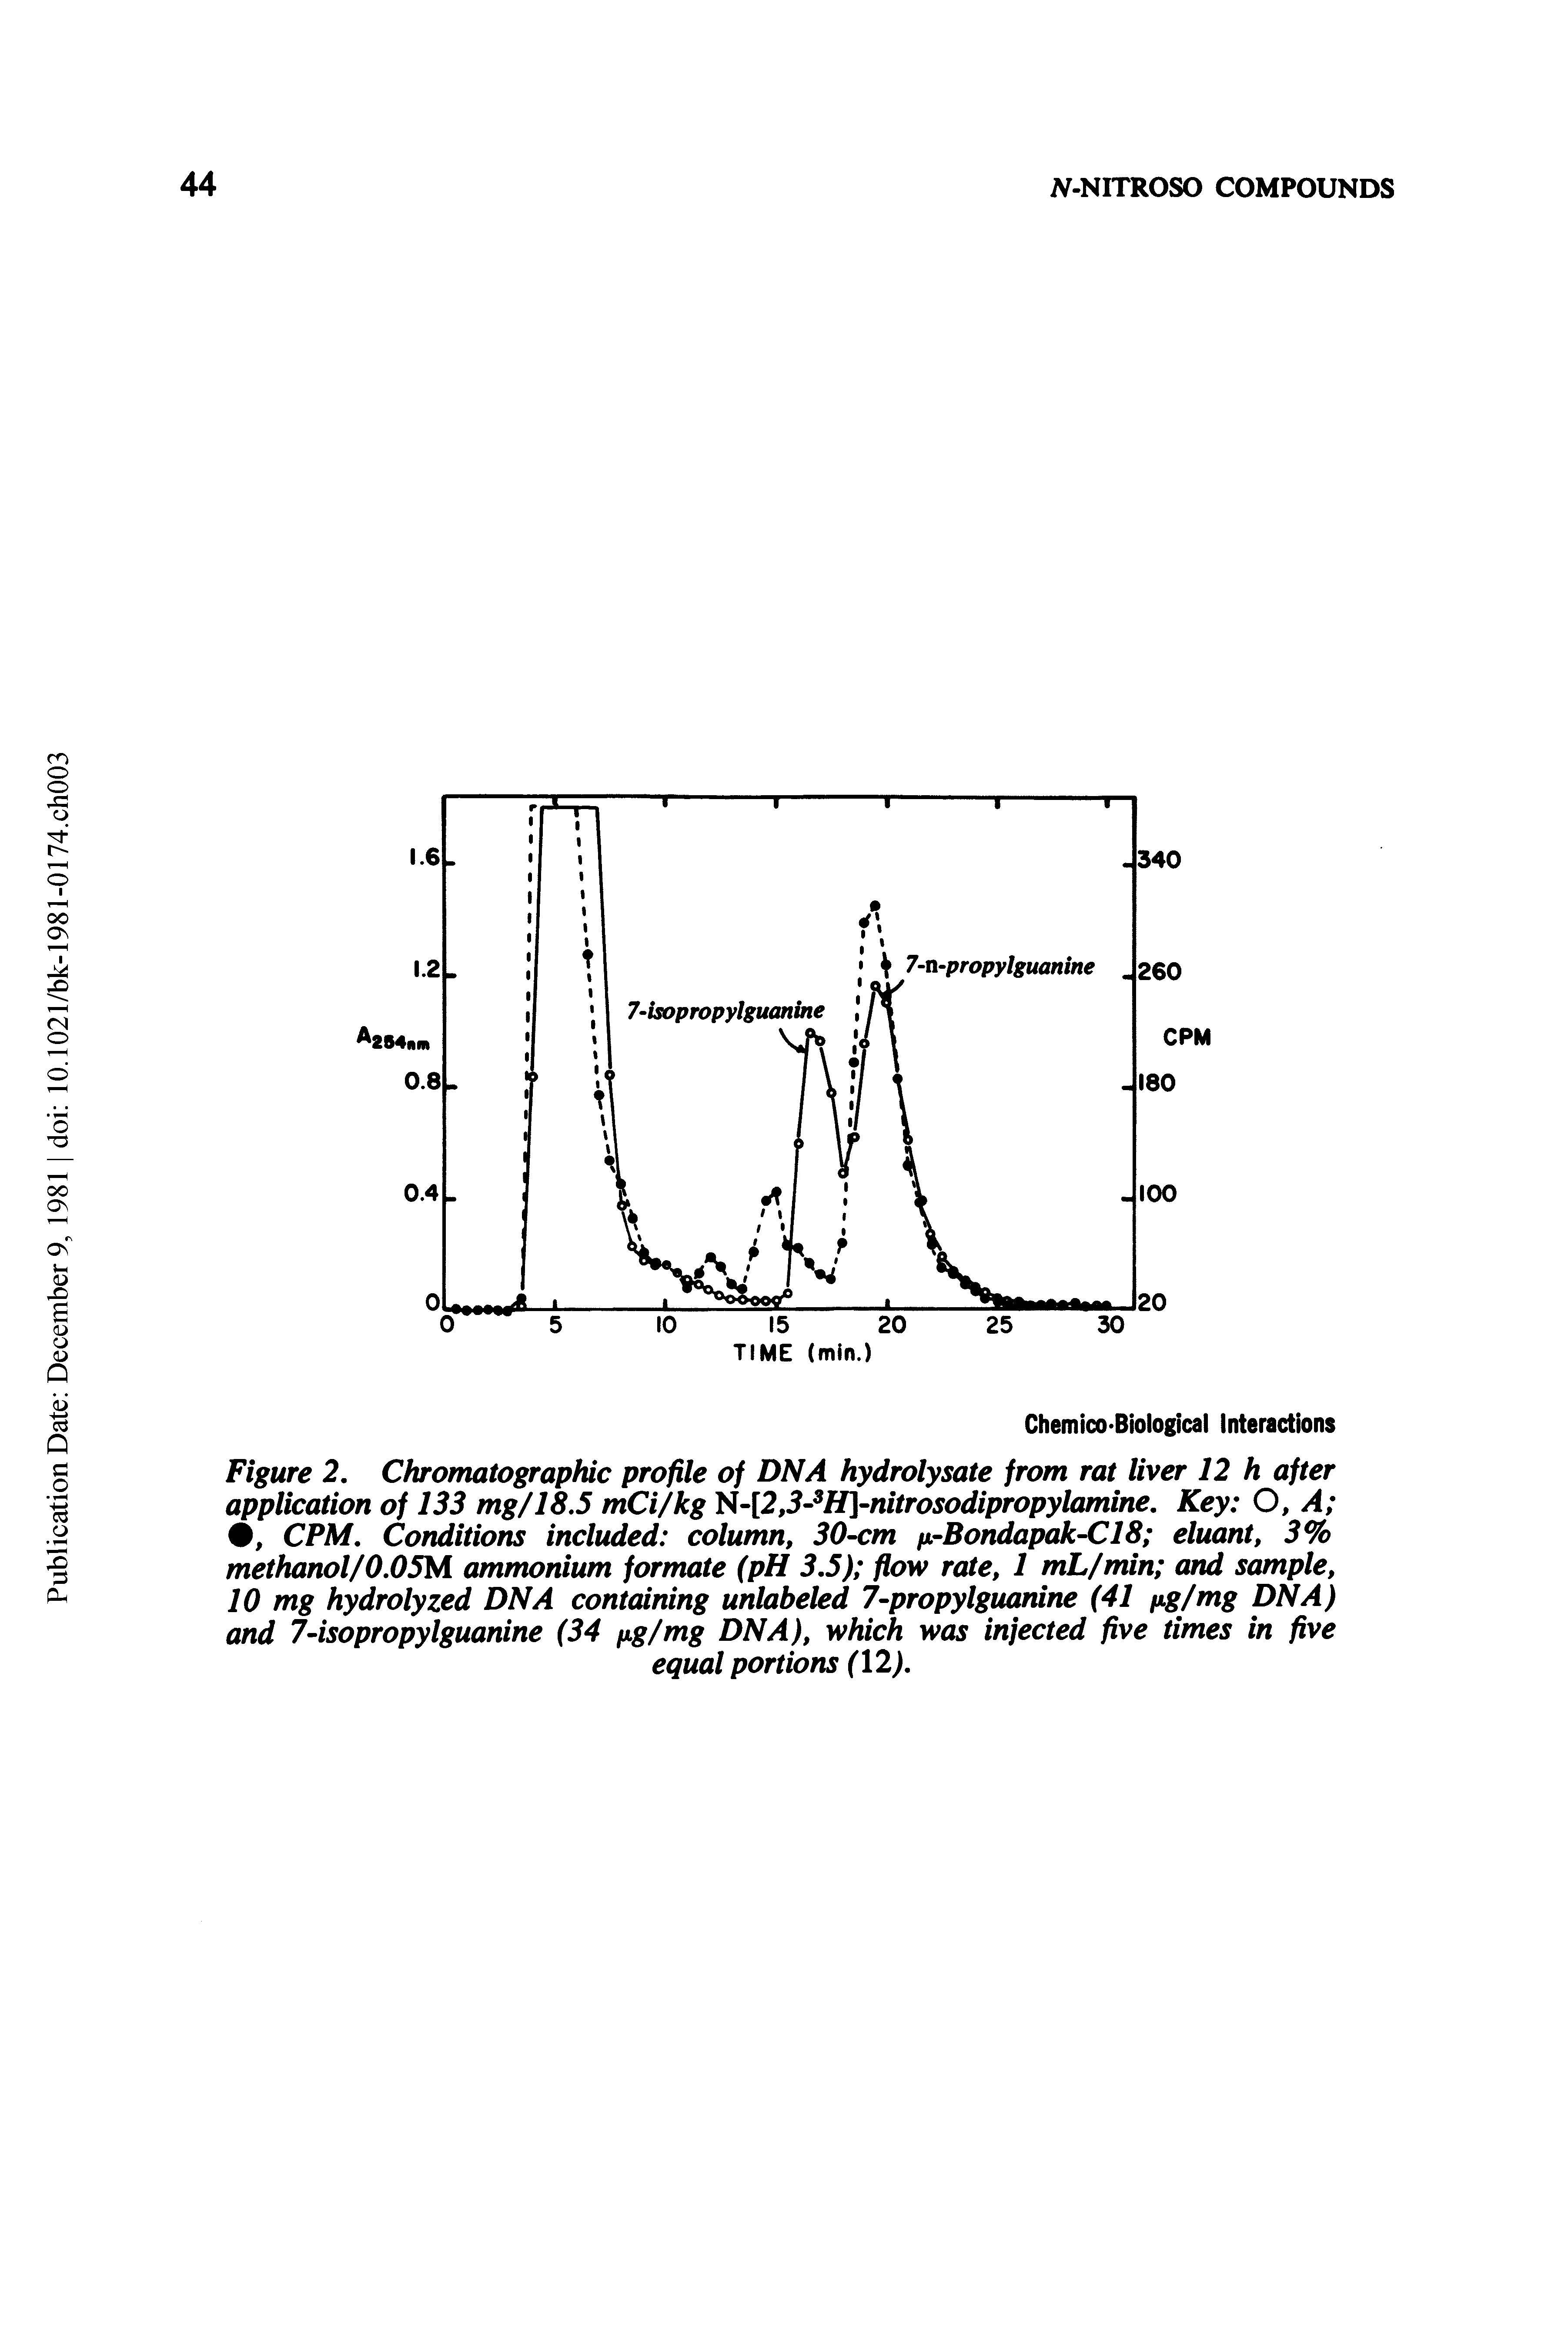 Figure 2. Chromatographic profile of DNA hydrolysate from rat liver 12 h after application of 133 mg/18.5 mCi/kg l l-[2f3- H]-nitrosodipropylamine. Key O, A , CPAf. Conditions included column, 30-cm i rBondapak-C18 eluant, 3% methanol/0.05M ammonium formate (pH 3.5) flow rate, 1 mL/min and sample, 10 mg hydrolyzed DNA containing unlabeled 7-propylguarune (41 fig/mg DNA) and 74sopropylguanine (34 fig/mg DNA), which was injected five times in five...